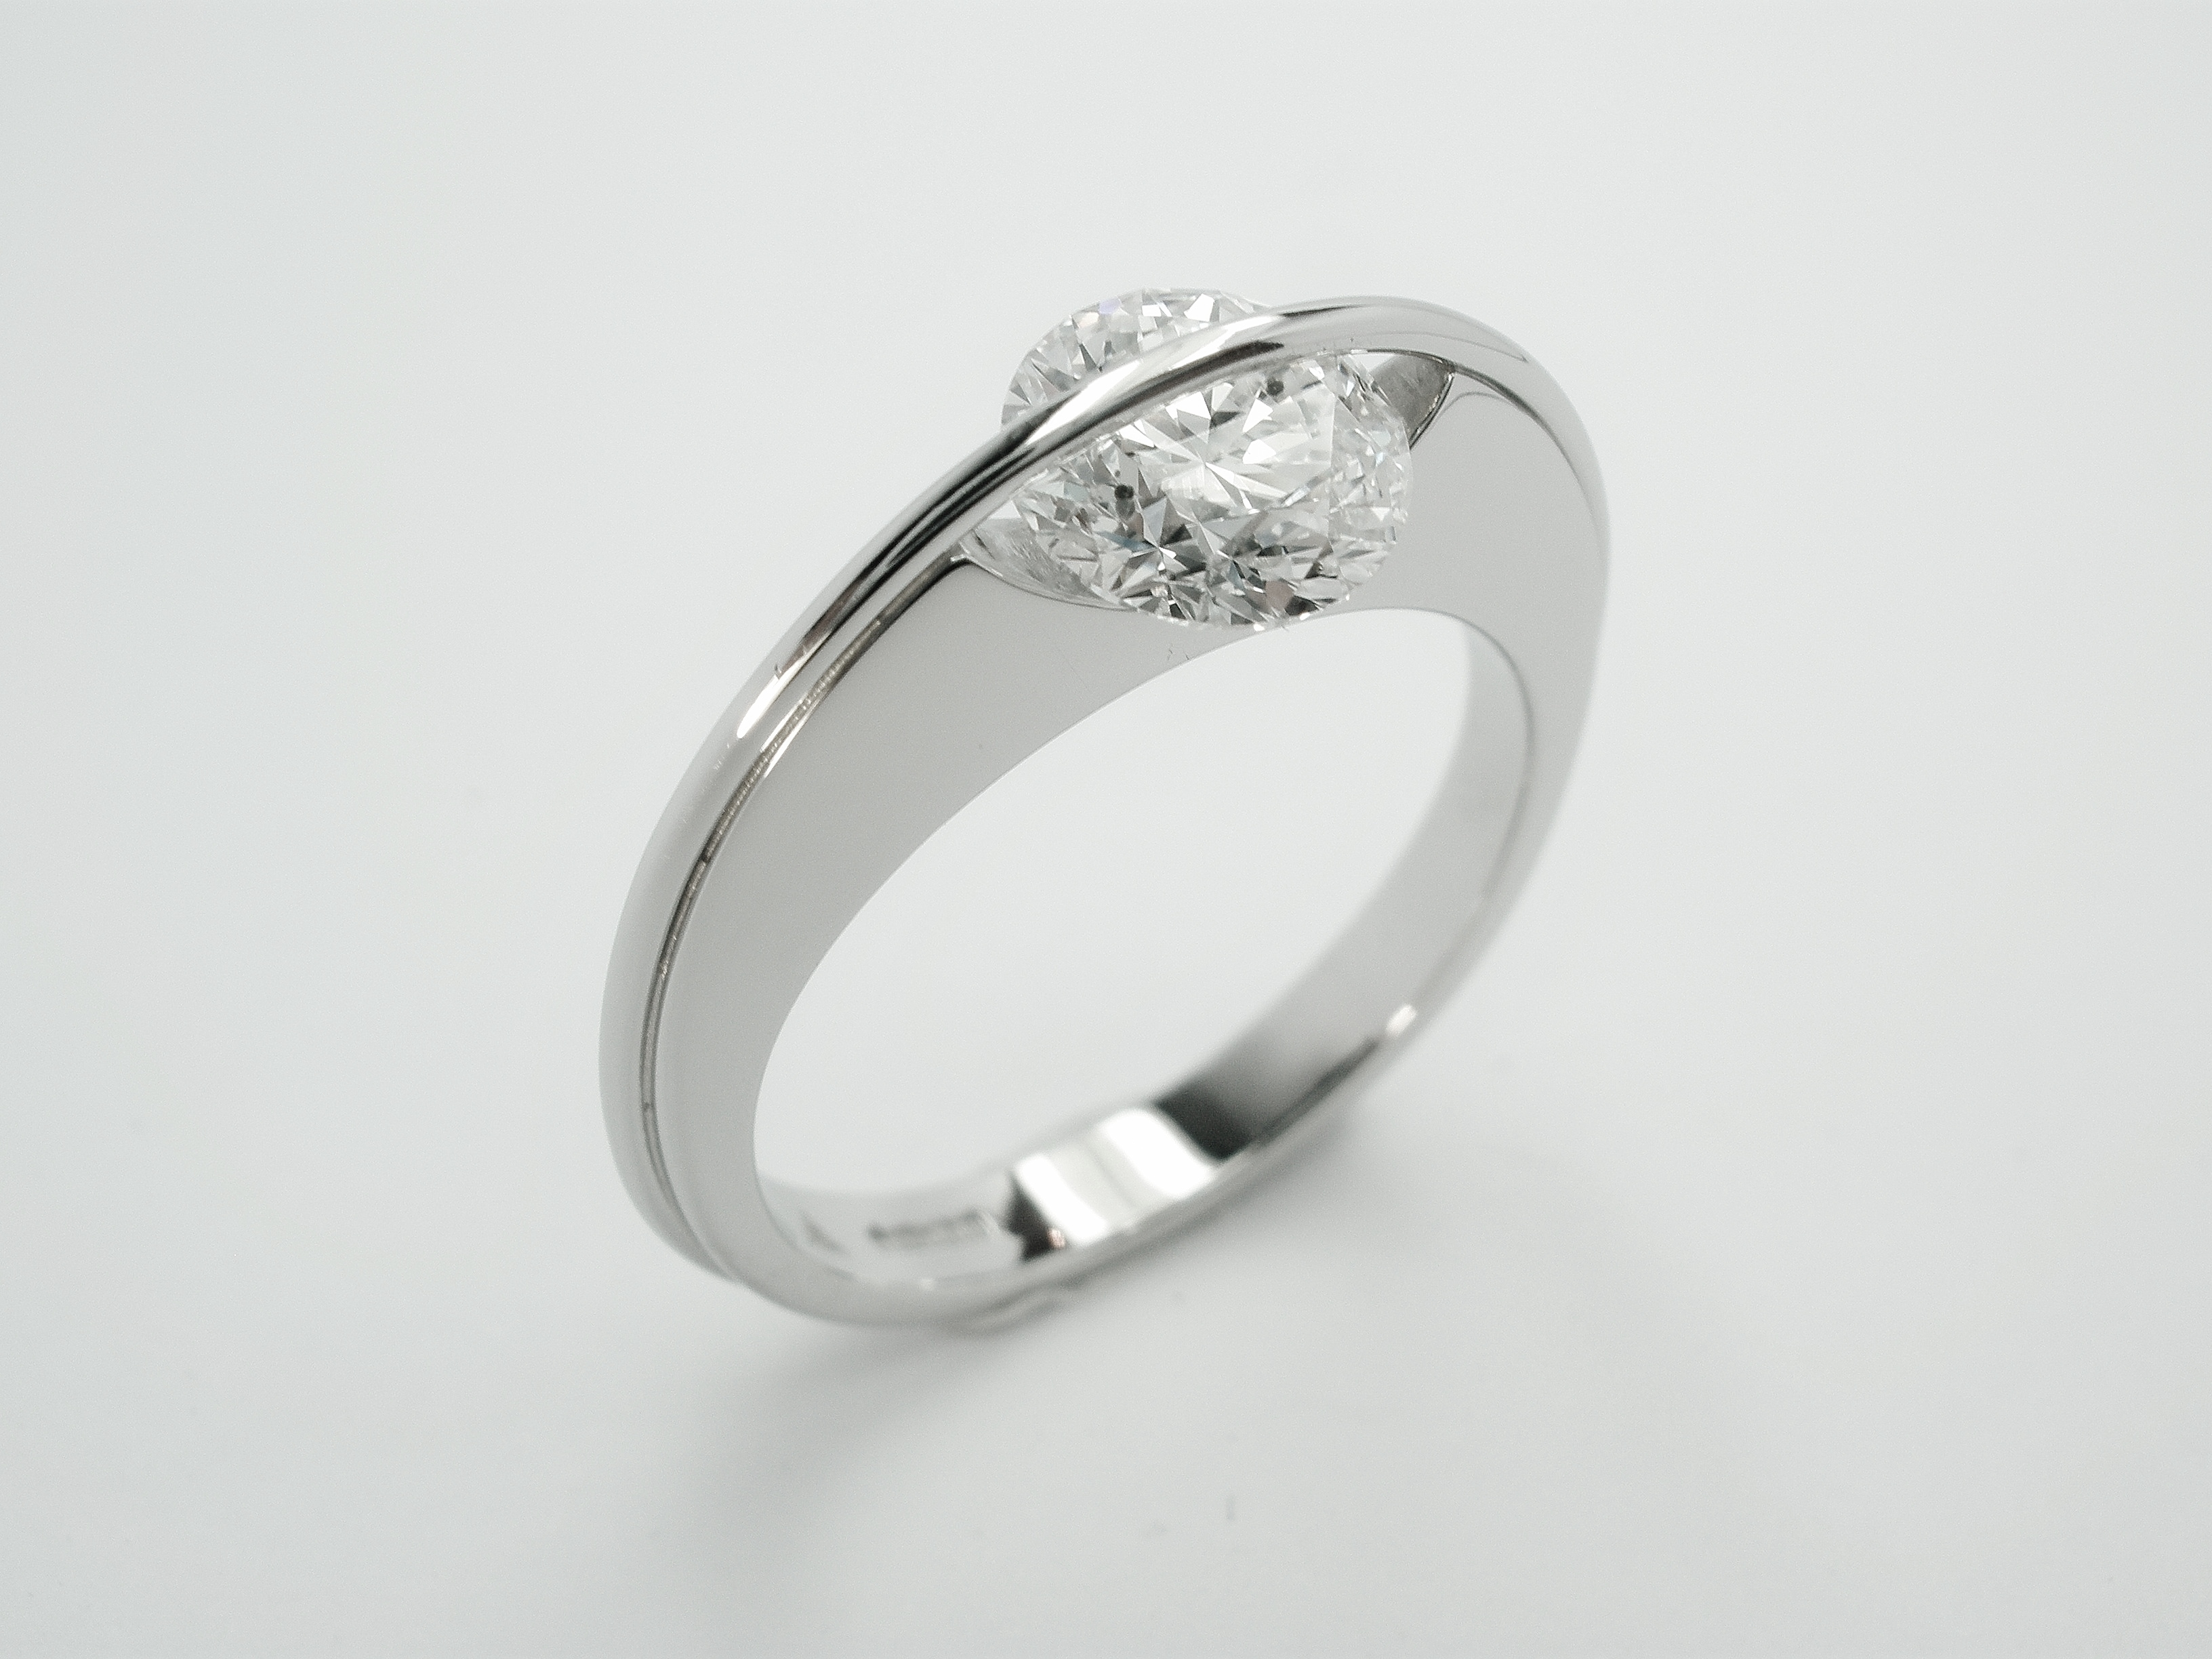 Platinum single stone 1.07ct. 'F' colour round brilliant cut diamond 'Lunar' style ring. Ideal diamond sizes from 0.50ct. to 1.25ct.